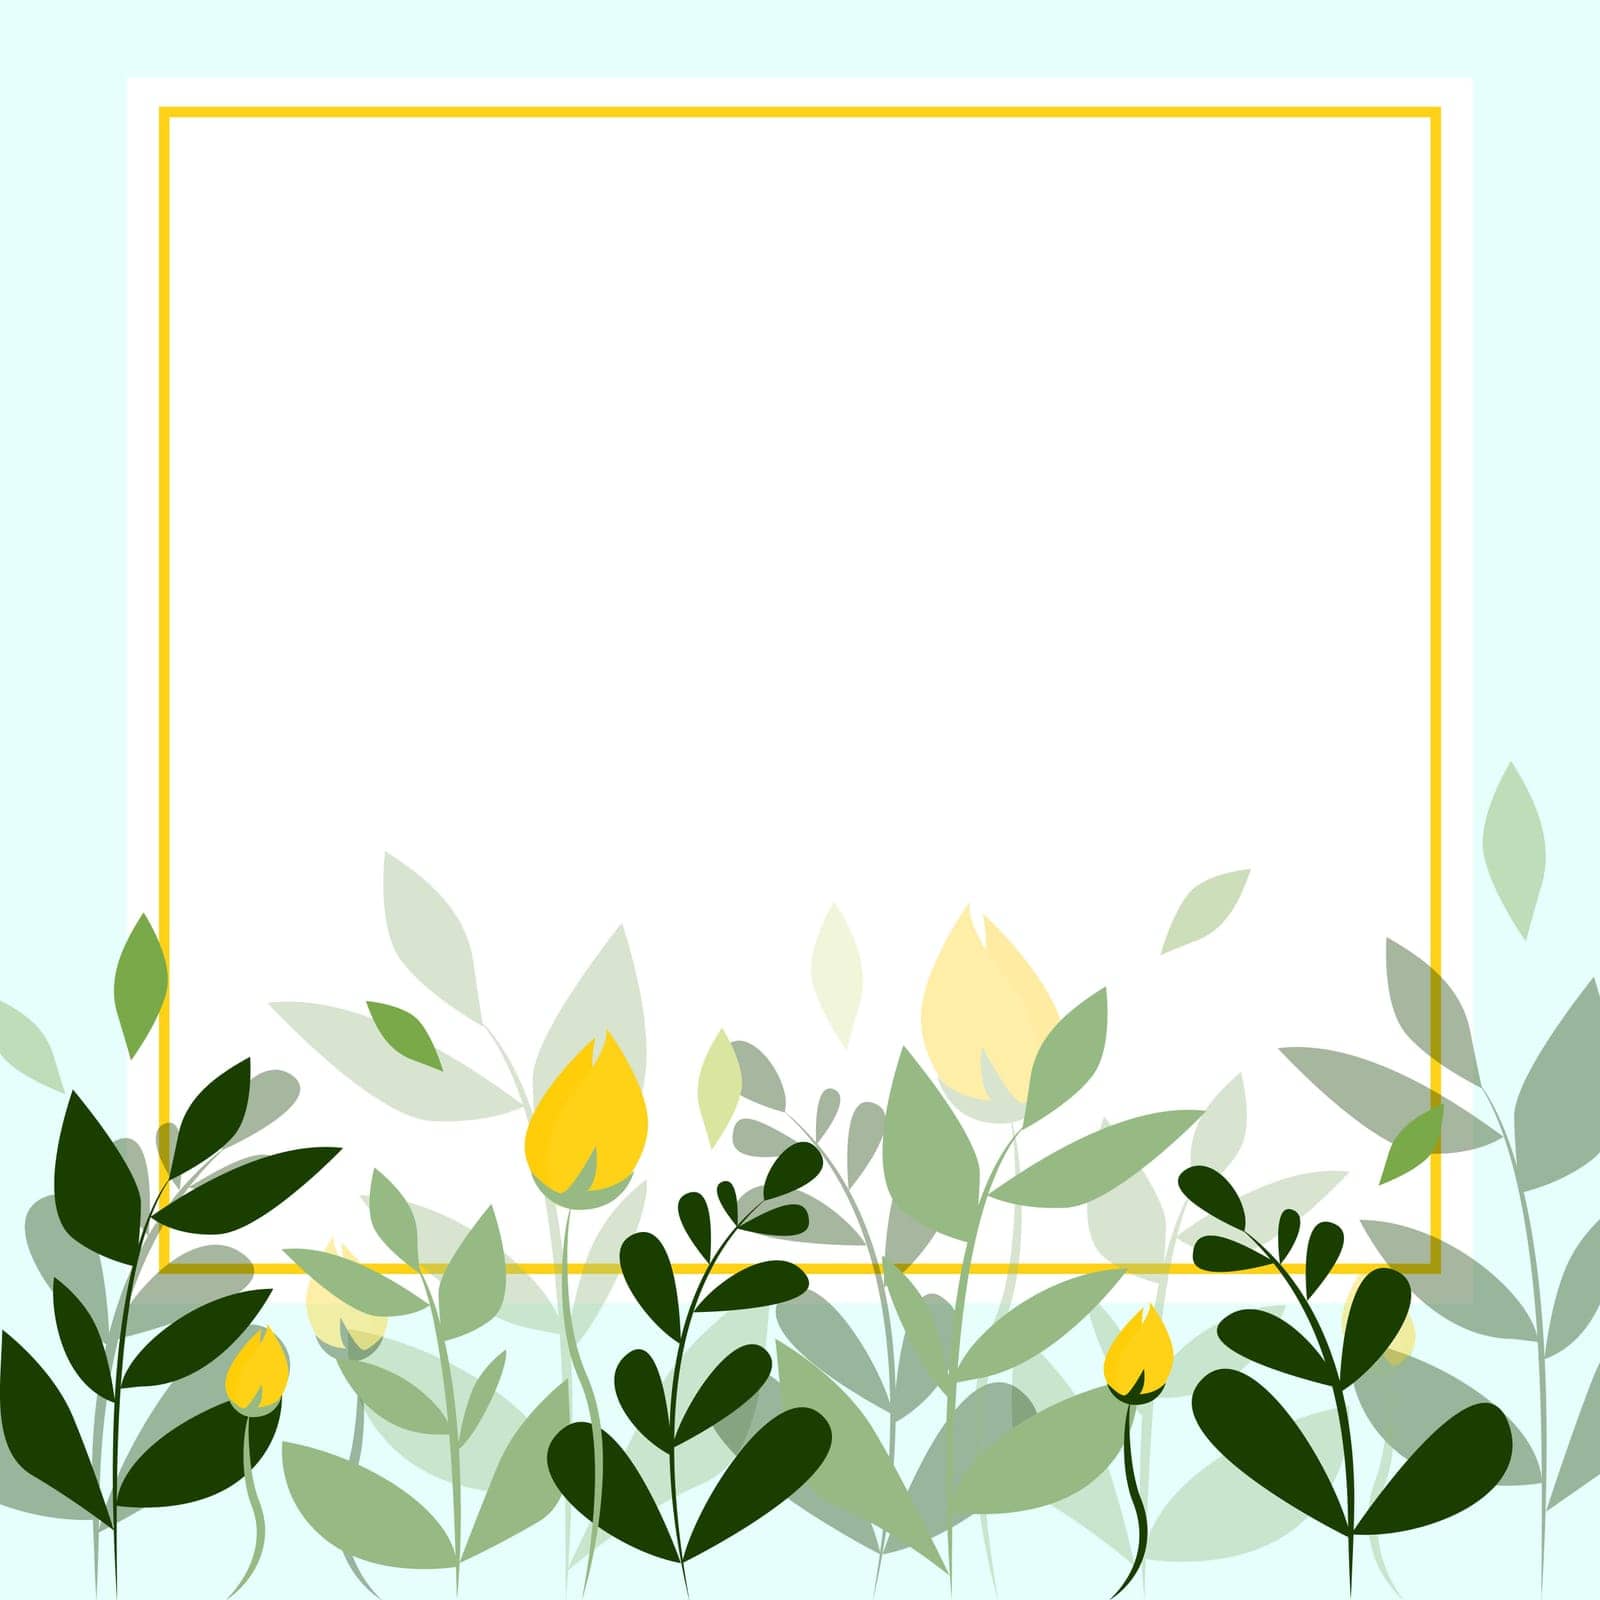 Light Blue Frame Decorated With Colorful Flowers And Foliage Arranged Harmoniously. Empty Poster Border Surrounded By Multicolored Bouquet Organized Pleasantly. by nialowwa